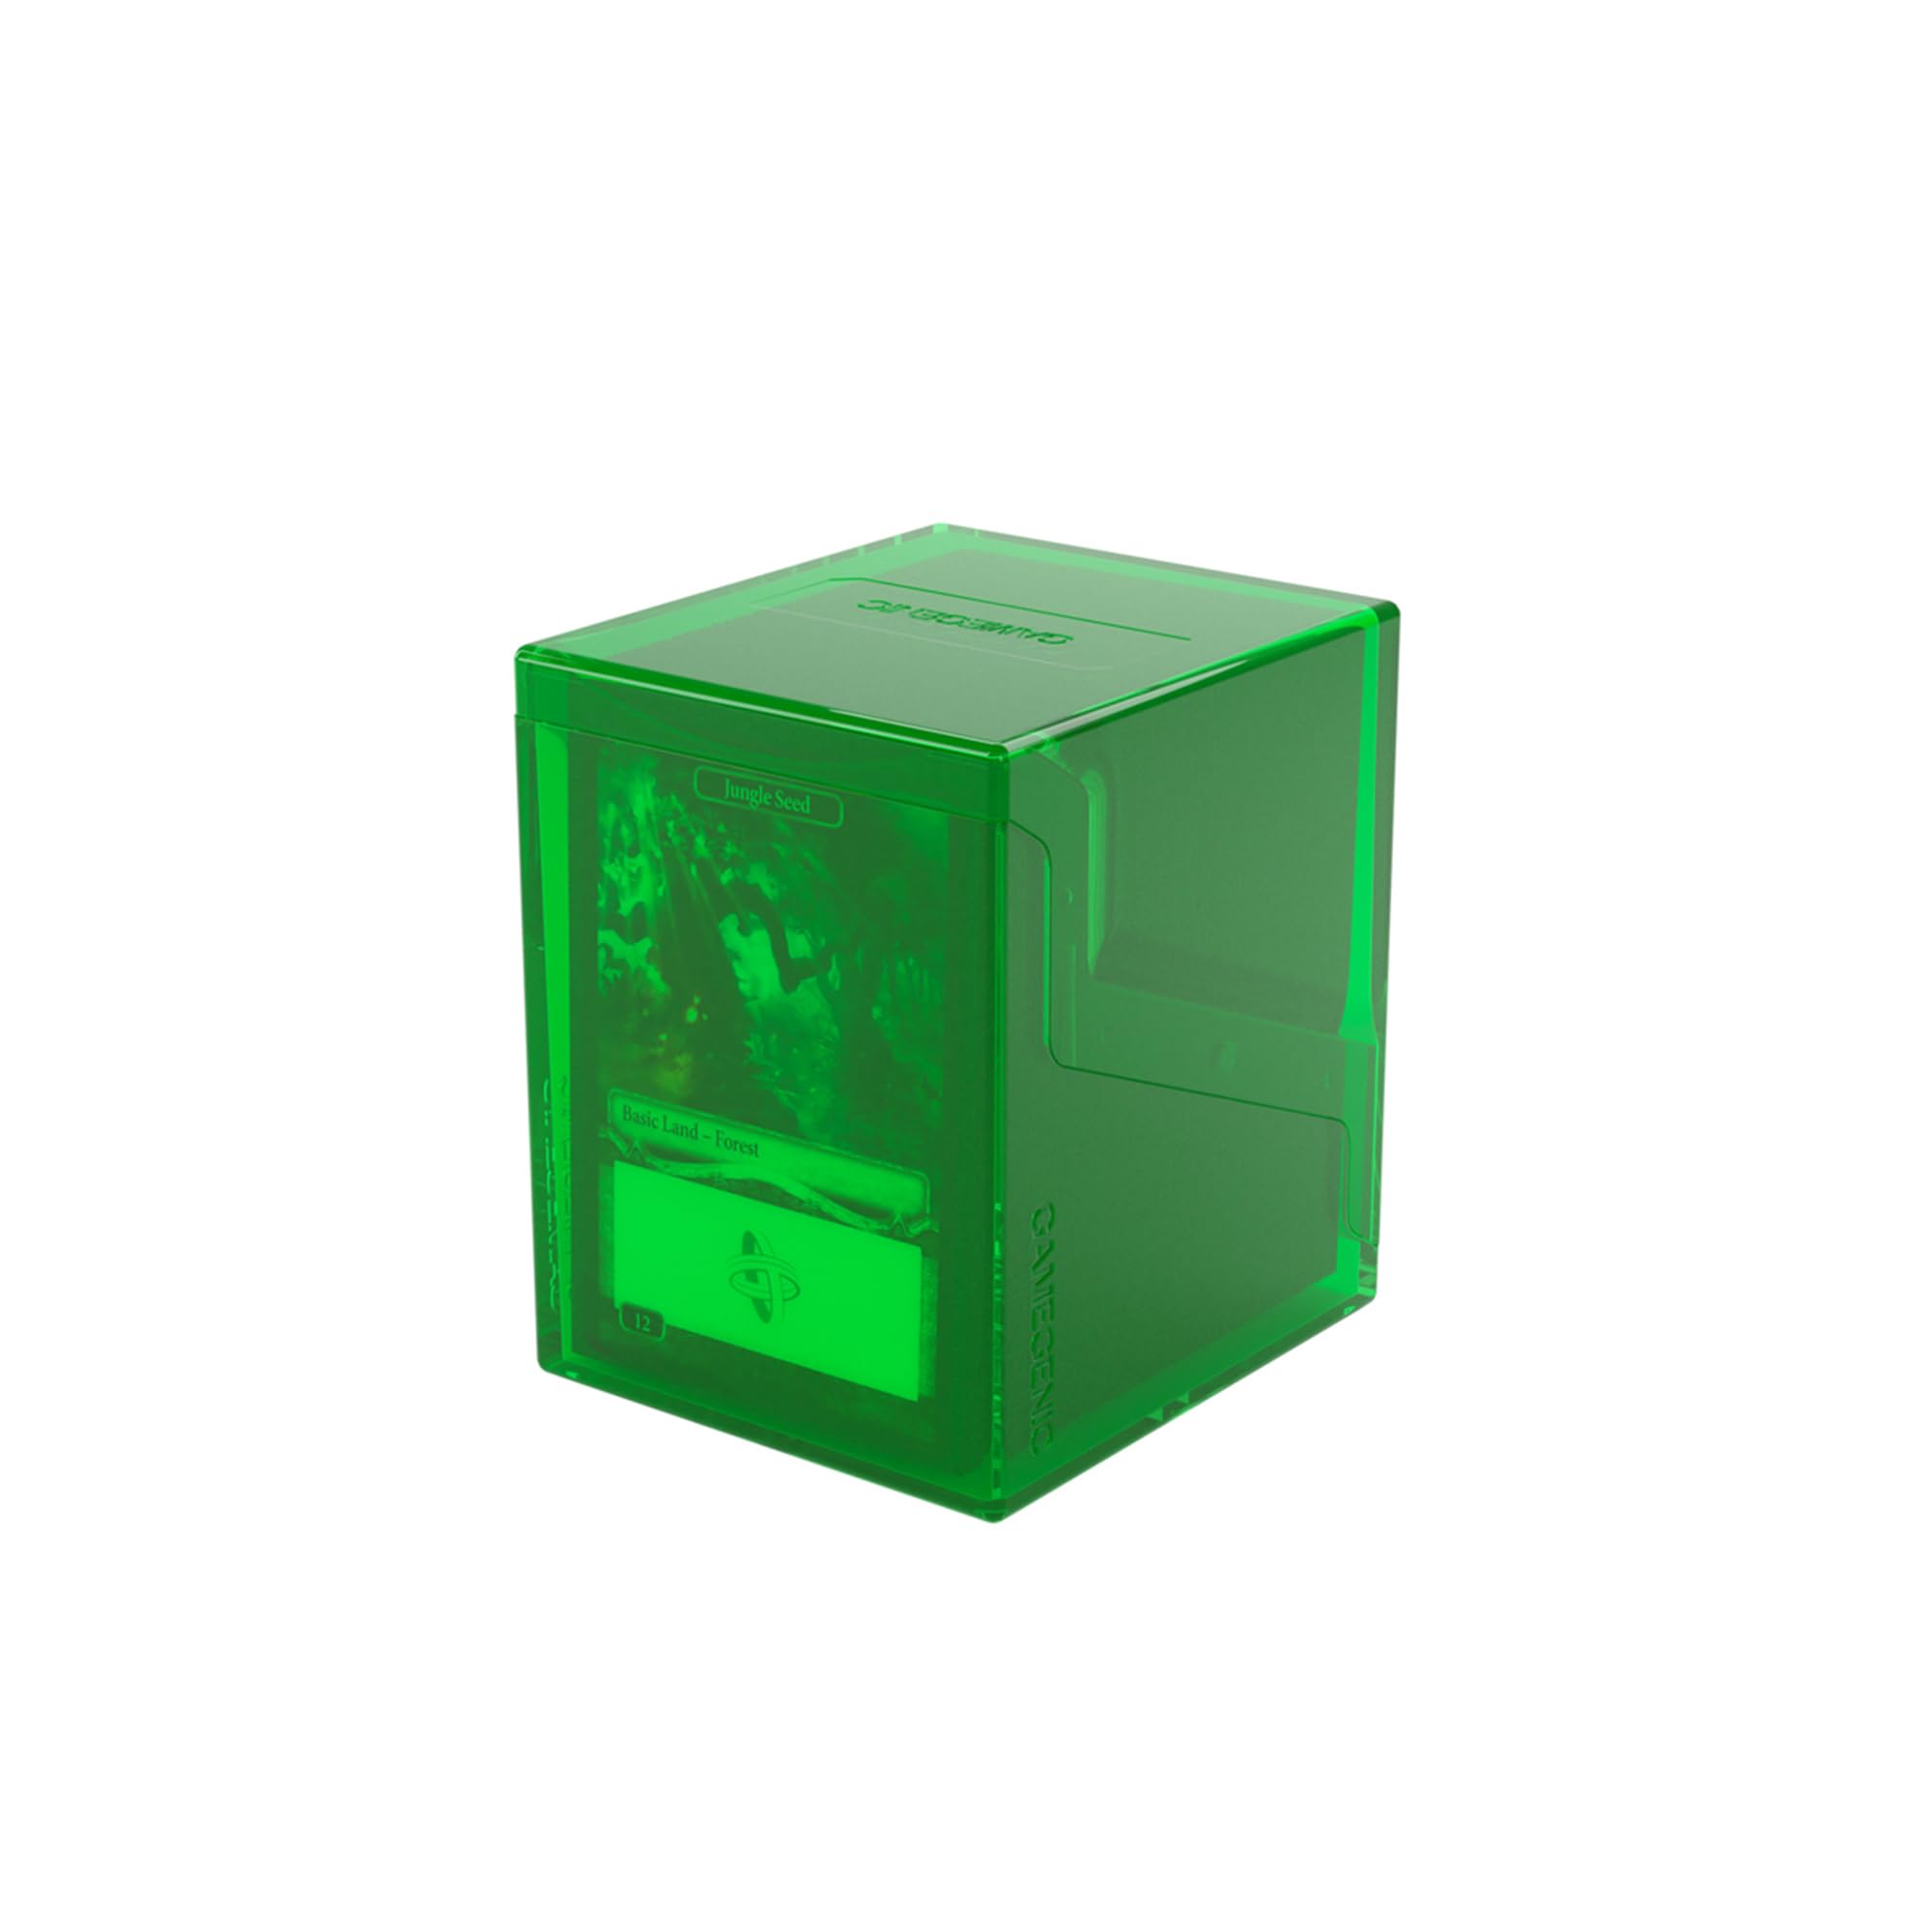 Gamegenic Bastion 100+ XL Deck Box - Compact, Secure, and Perfectly Organized for Your Trading Cards! Safely Protects 100+ Double-Sleeved Cards, Green Color, Made